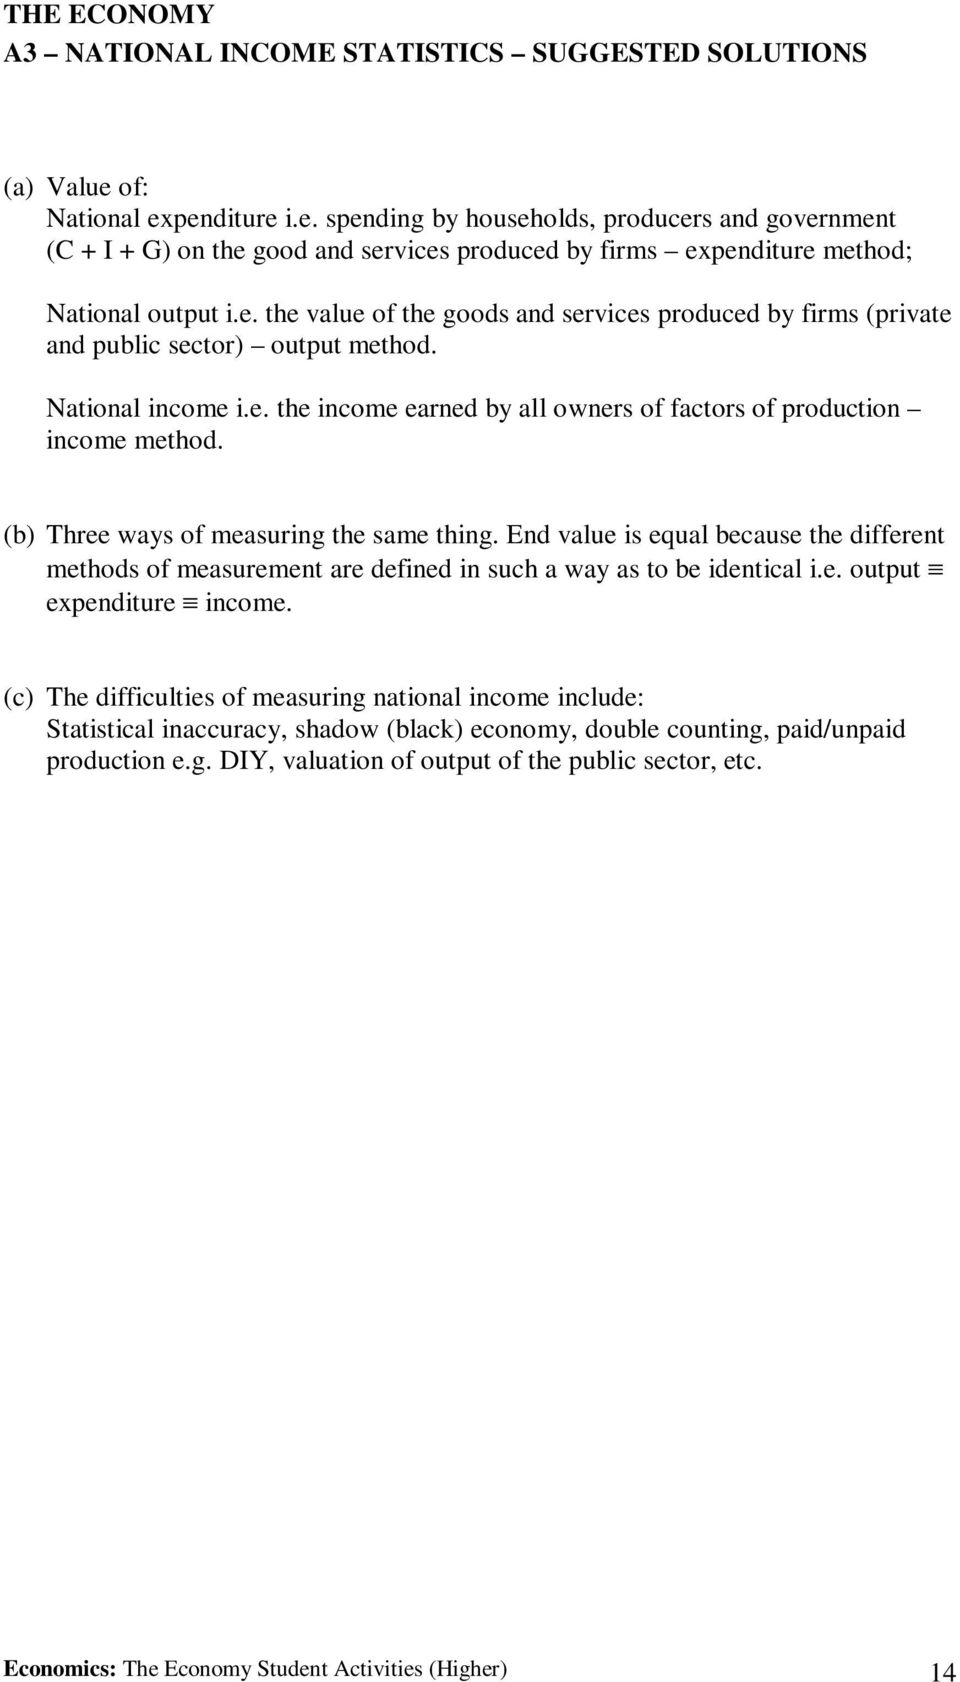 what are the difficulties in measuring national income